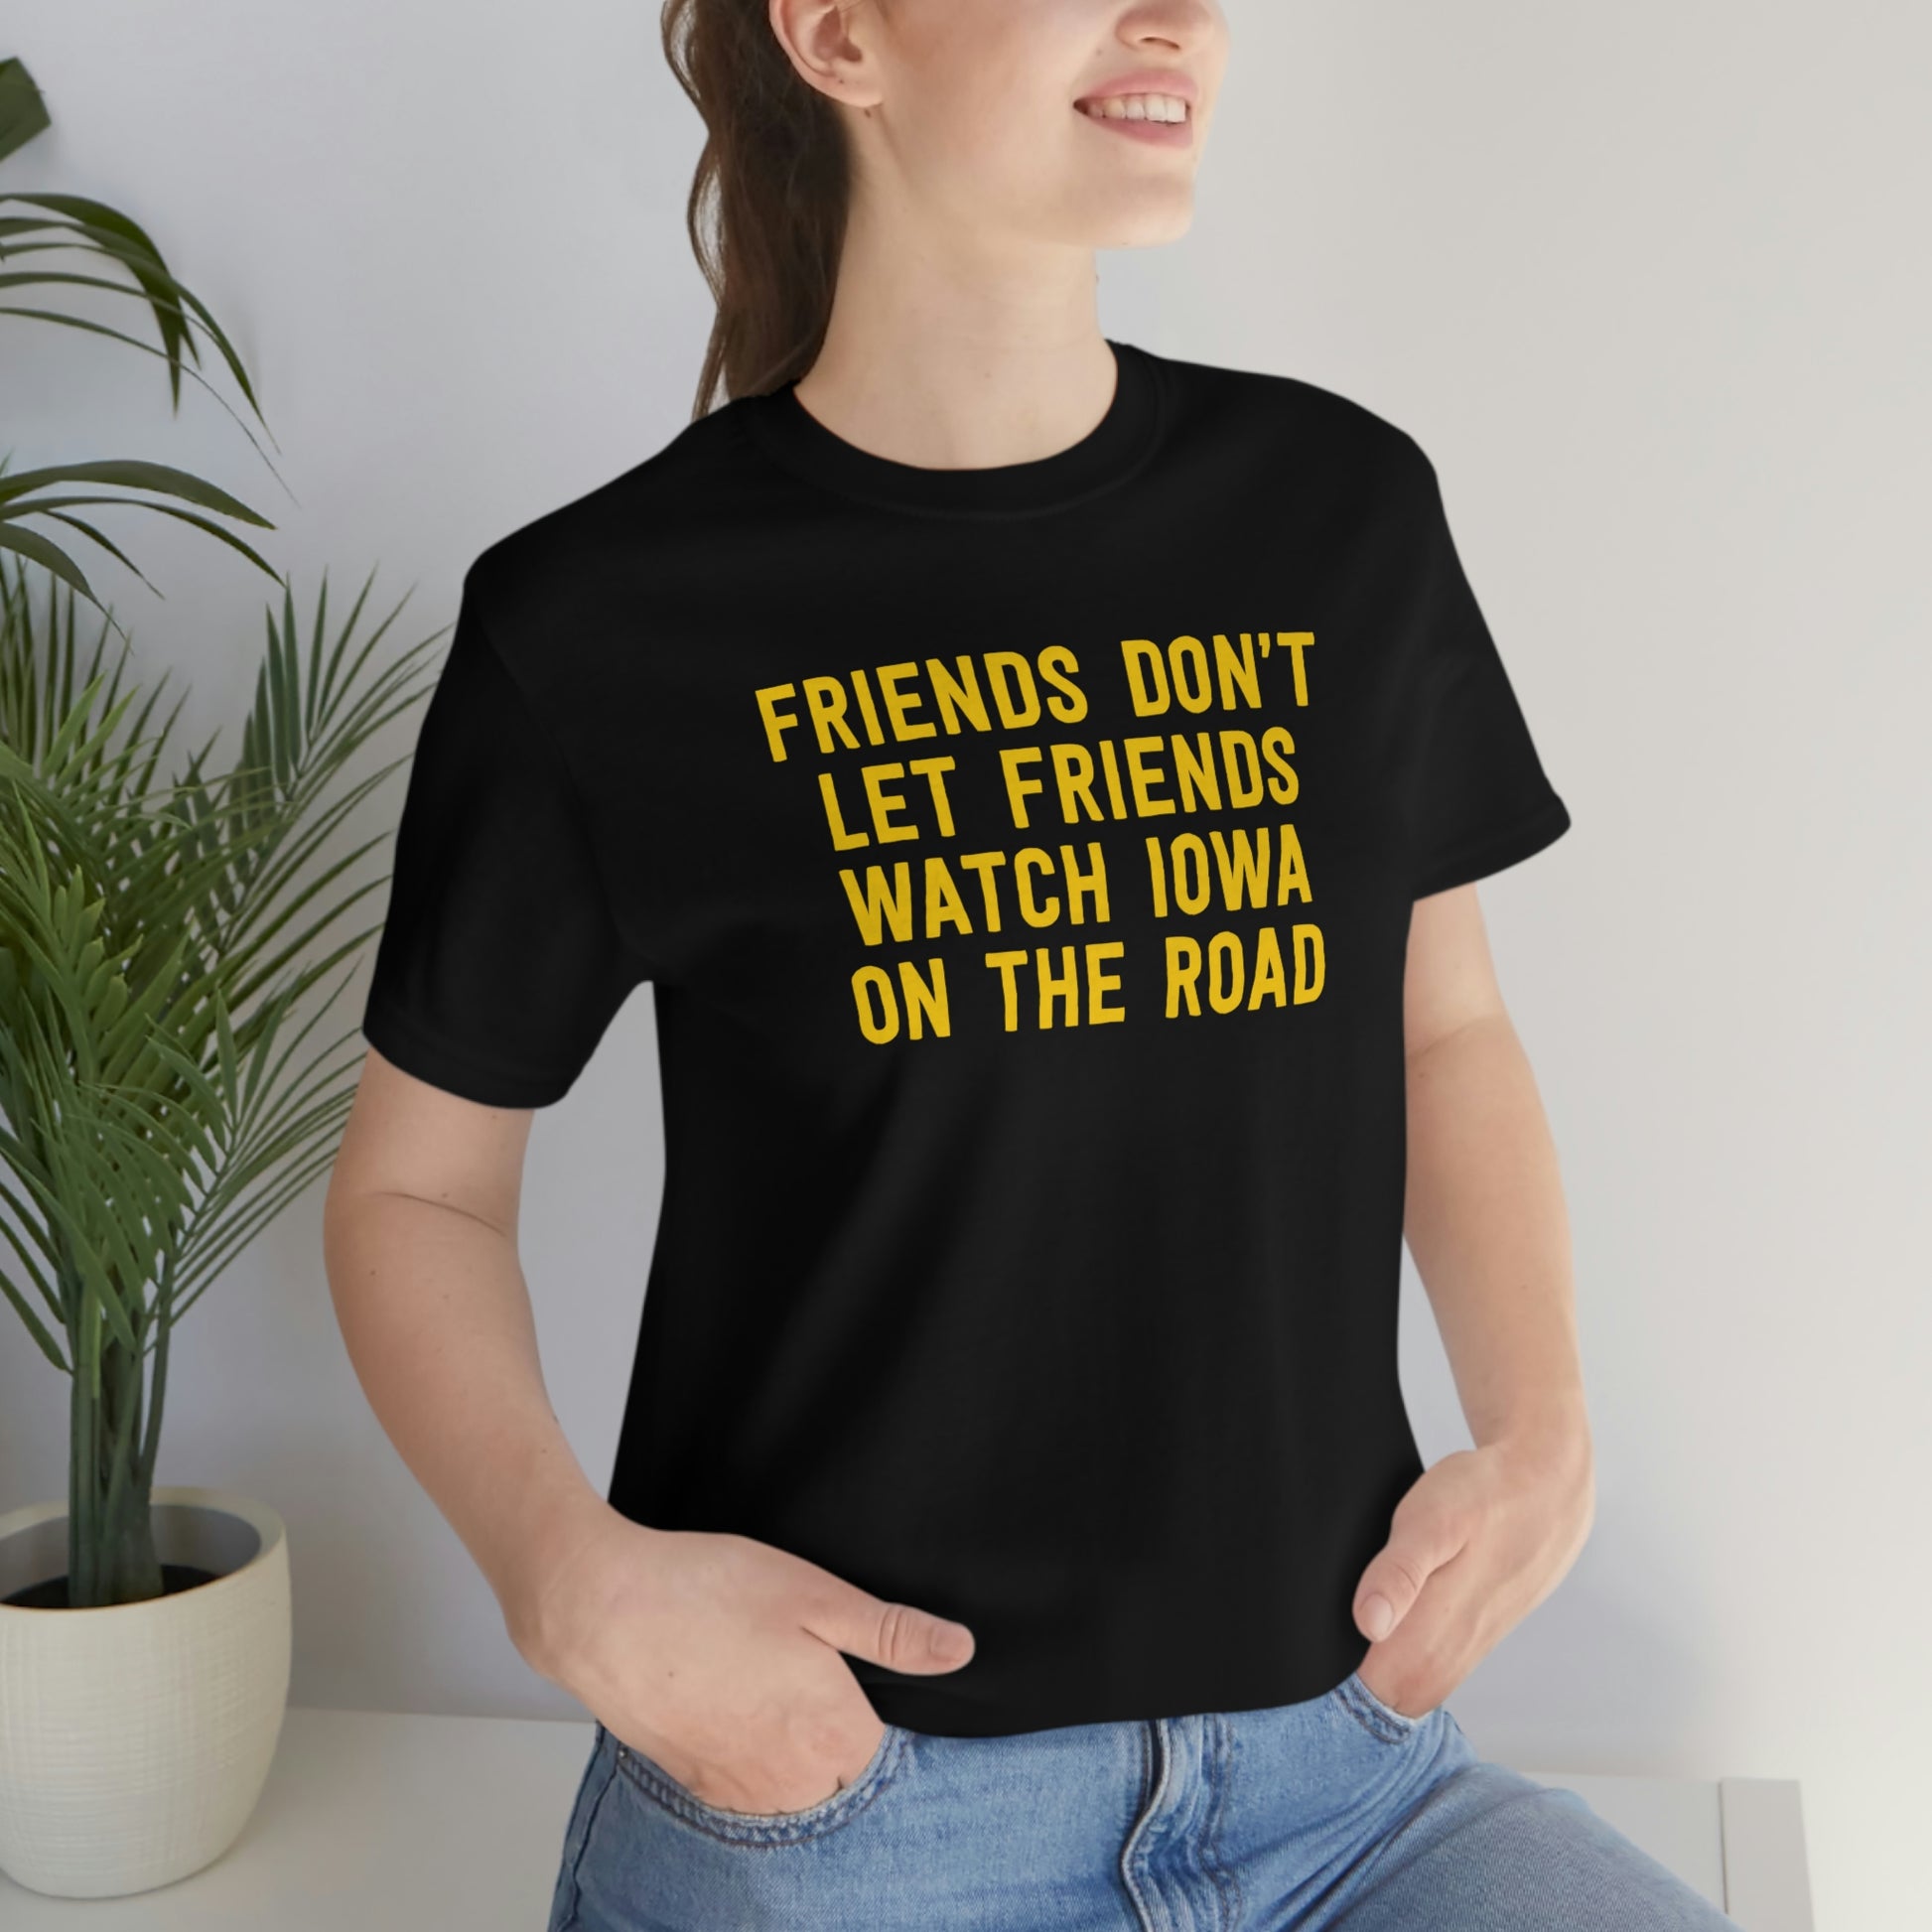 Friends Don't Let Friends Watch Iowa On The Road Shirt in Black and Gold - Female Casual Model